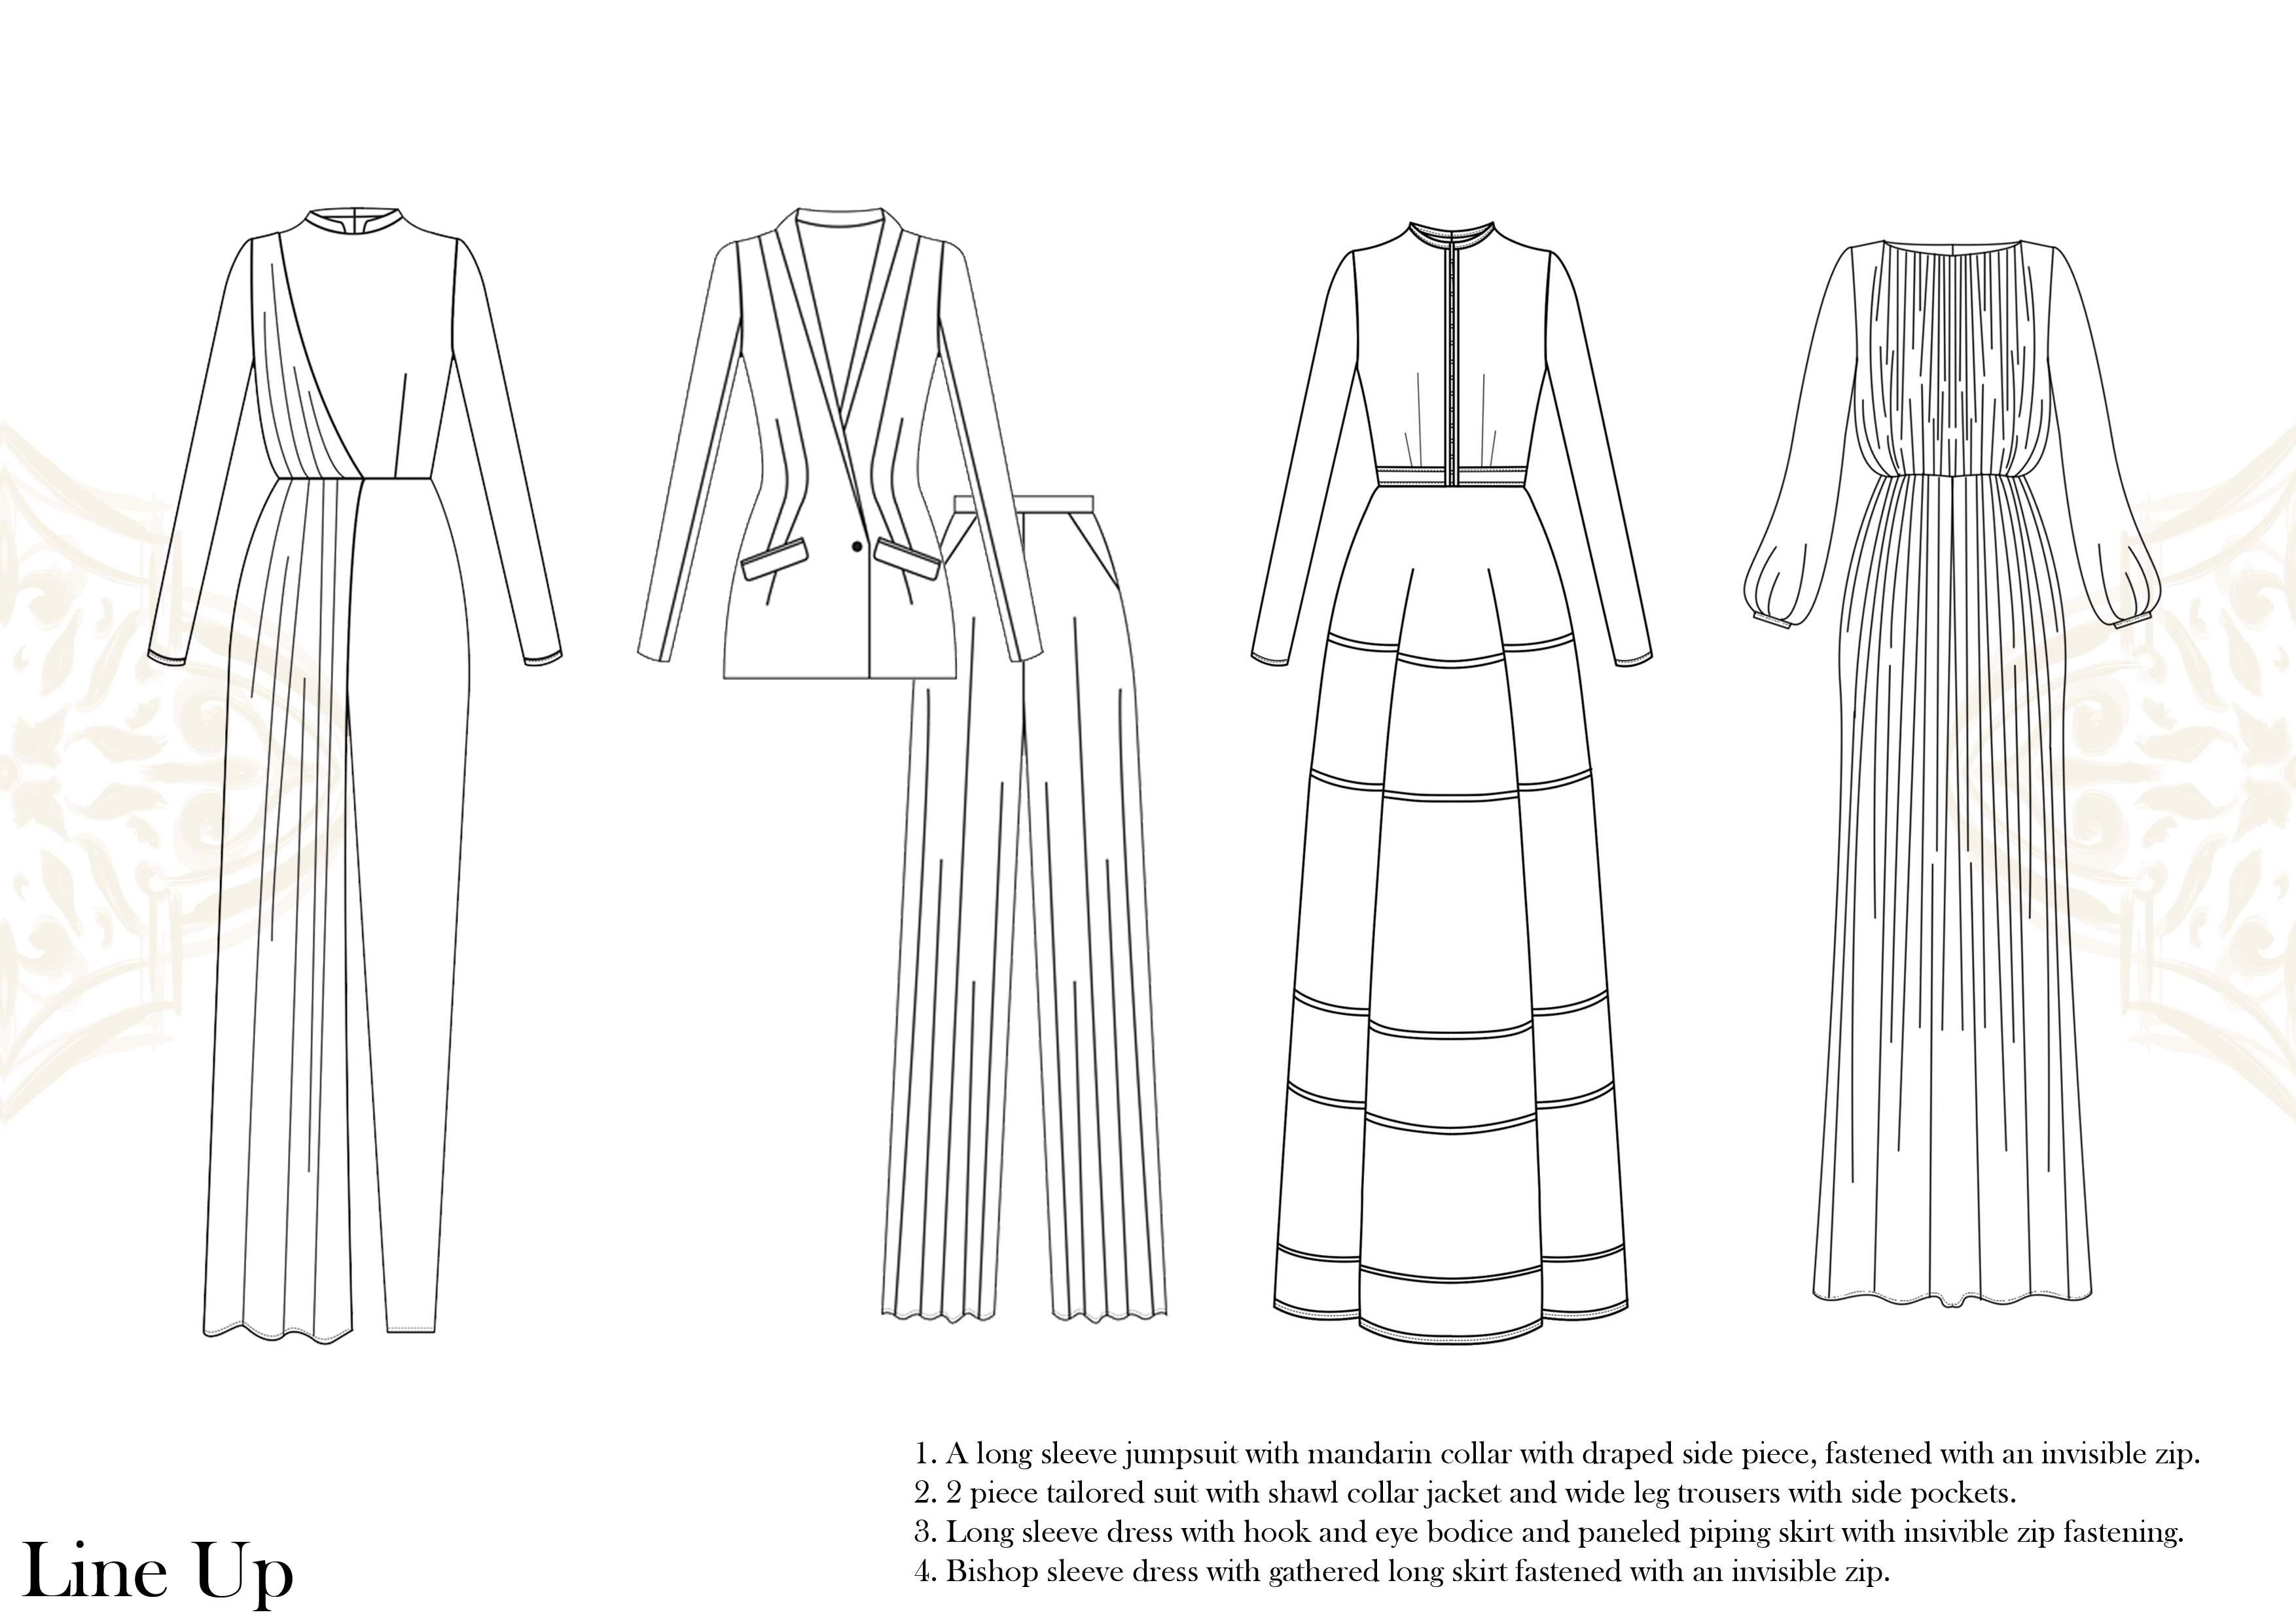 >=

 

1. A long sleeve jumpsuit with mandarin collar with draped side piece, fastened with an mvisible zp.
2. 2 piece tailored suit with shawl collar jacket and wide leg trousers with side pockets.
3. Long sleeve dress with hook and eye bodice and paneled piping skirt with msivible zip fastening,

I. Bishop sleeve dress with gathered long skirt fastened with an mvisible zip.

Line Up